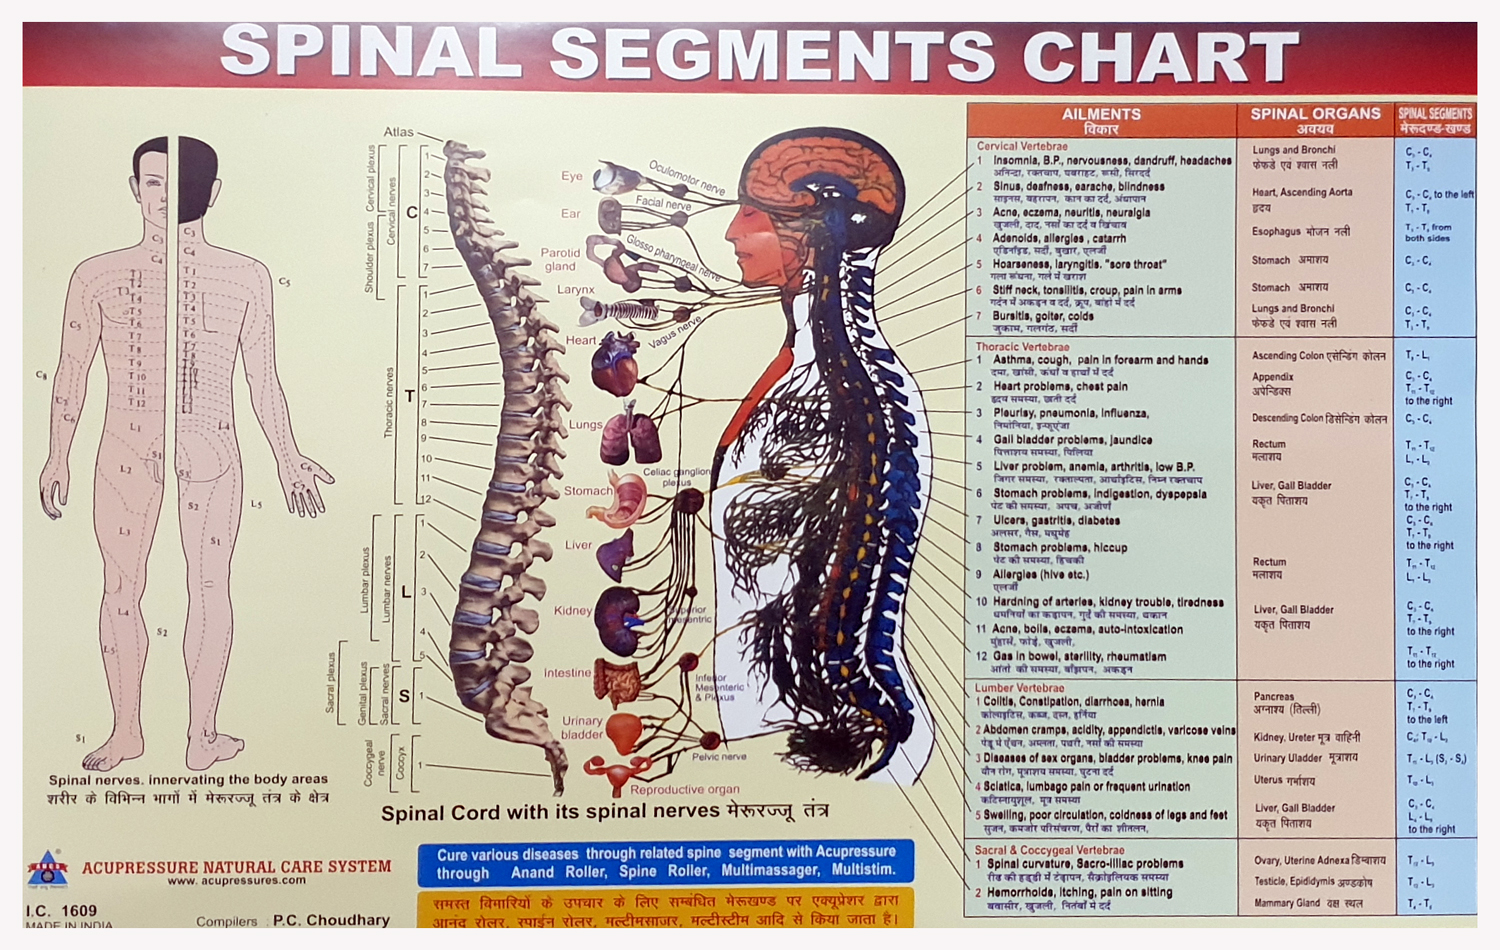 ANCS Spine Chart - Spinal Segments 